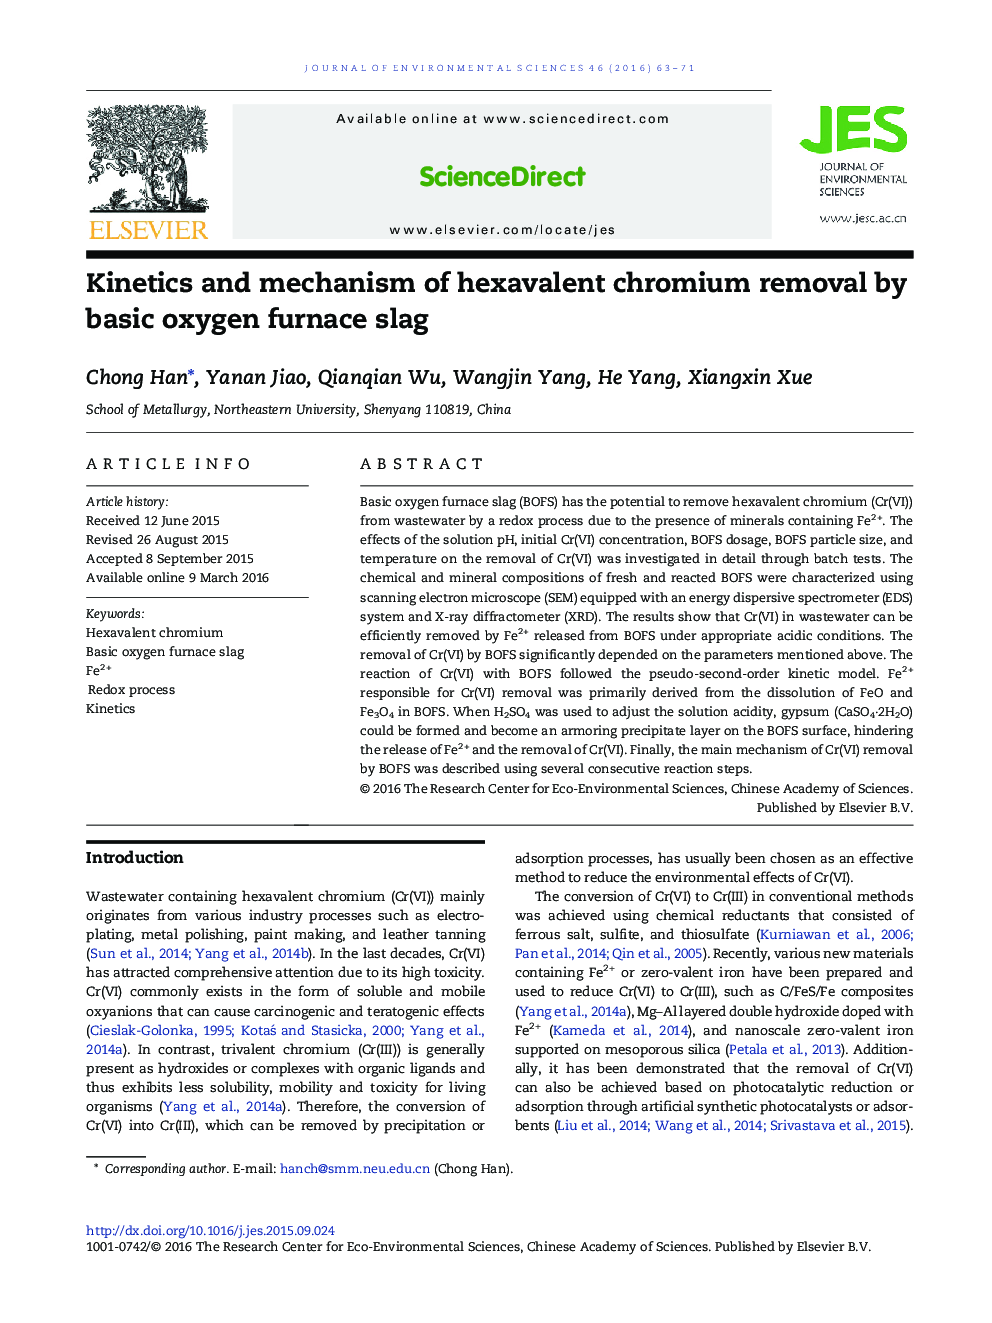 Kinetics and mechanism of hexavalent chromium removal by basic oxygen furnace slag